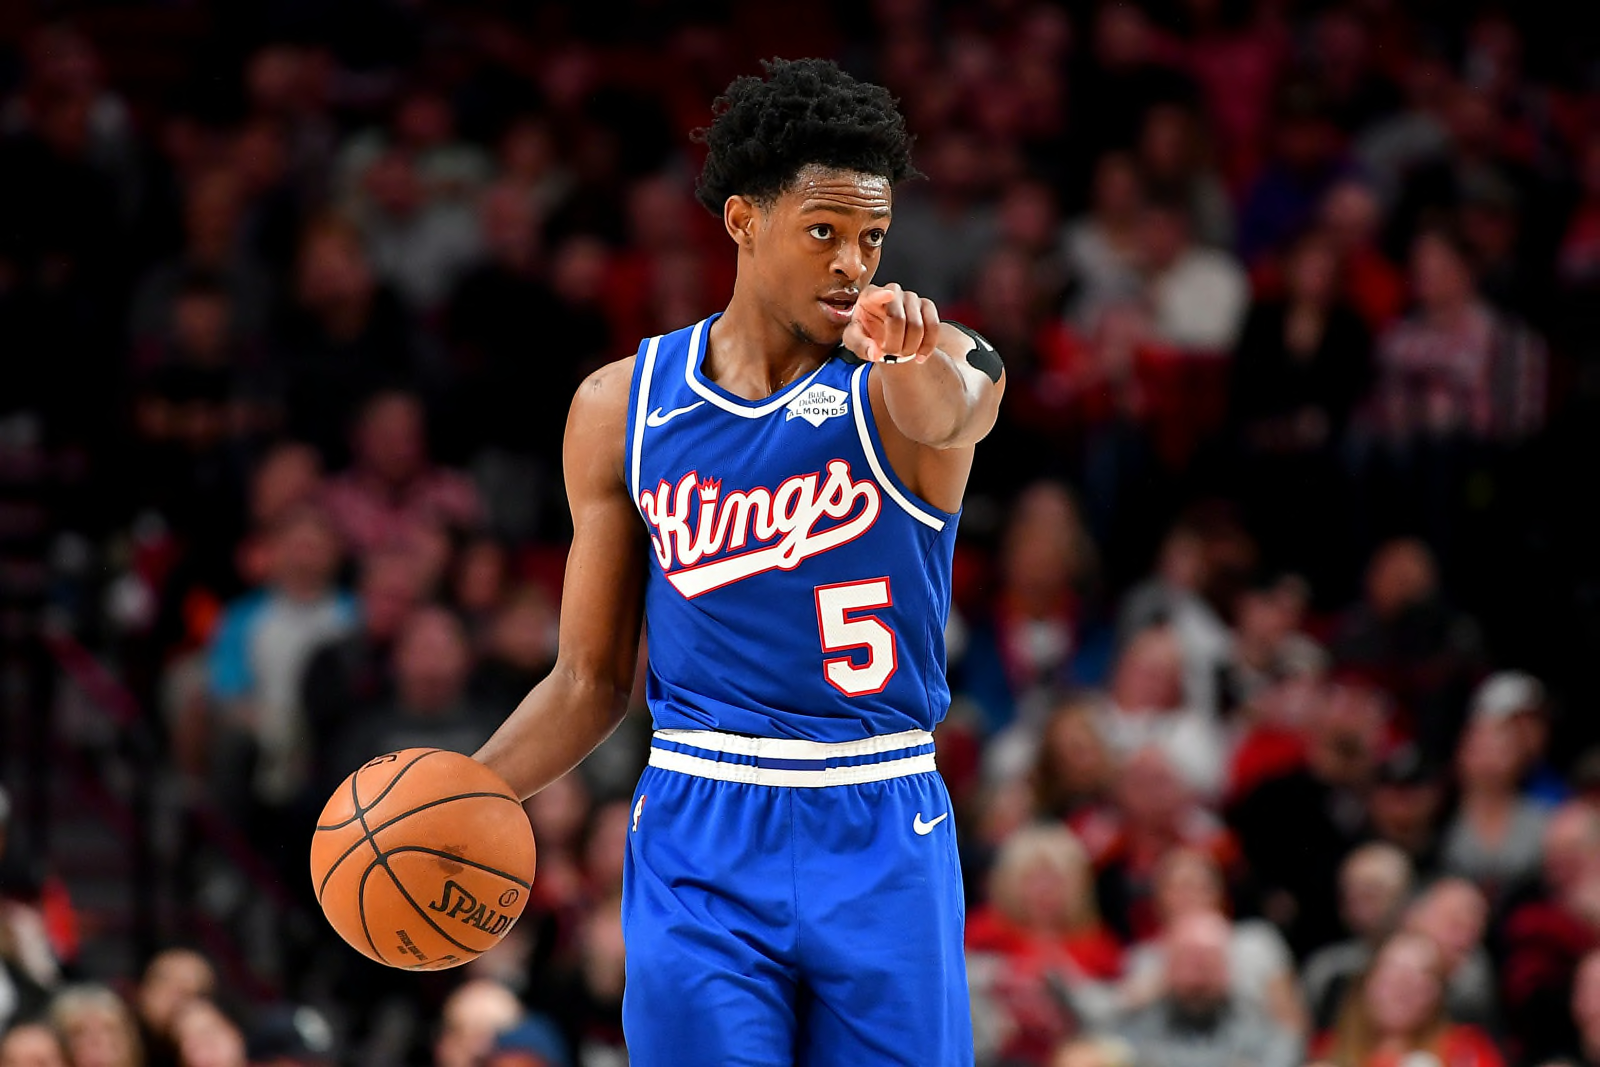 Ranking the NBA's 2019-20 season 'Classic' jersey collection - Page 4